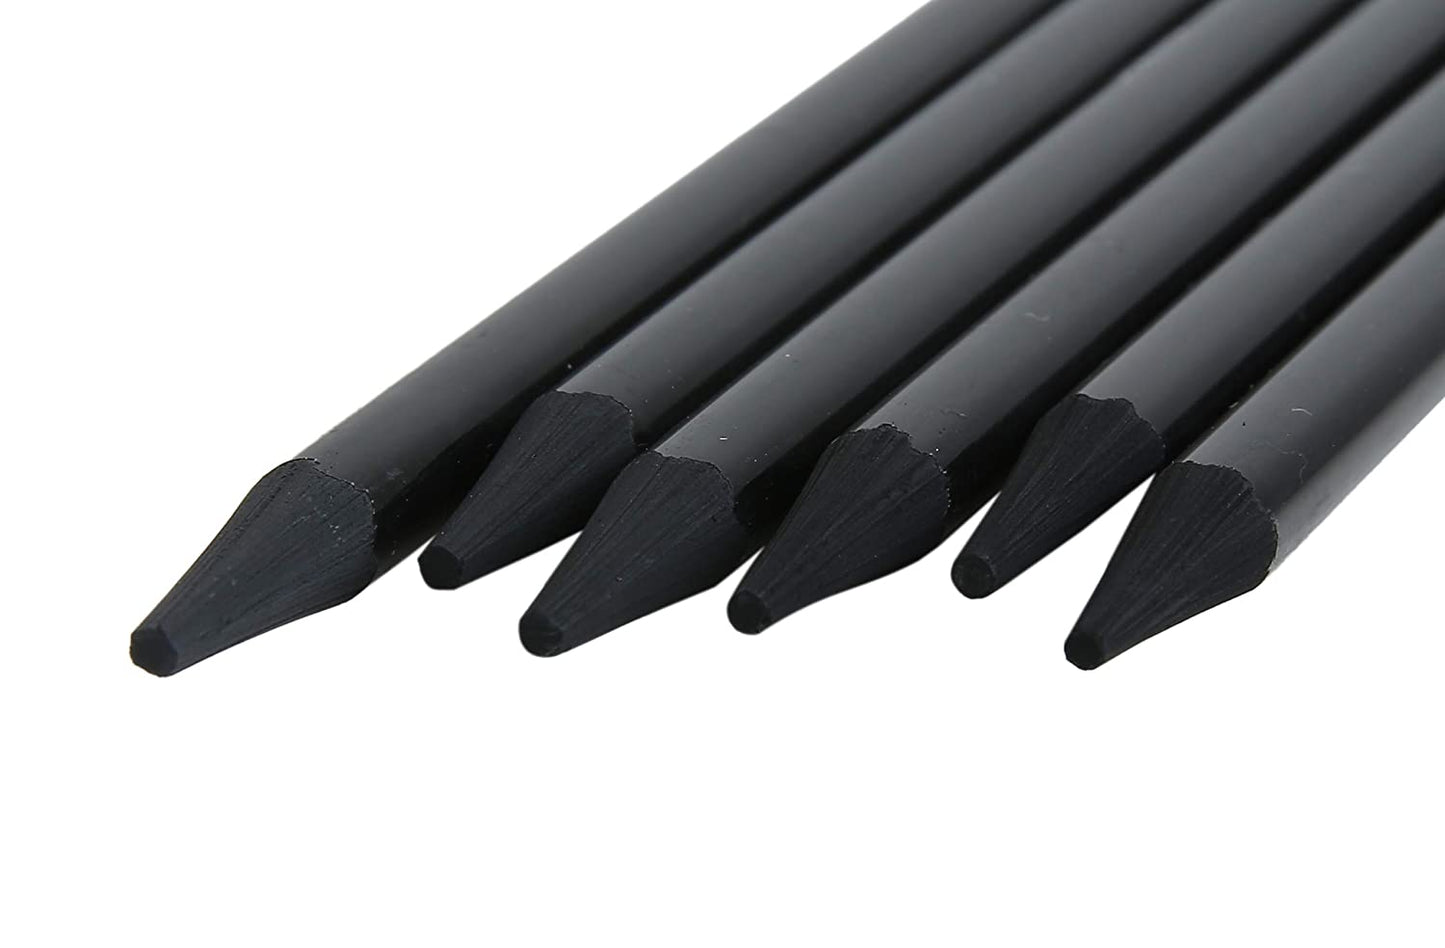 ThePortraitArt Woodless Pure Charcoal Pencils - Set Equivalent to